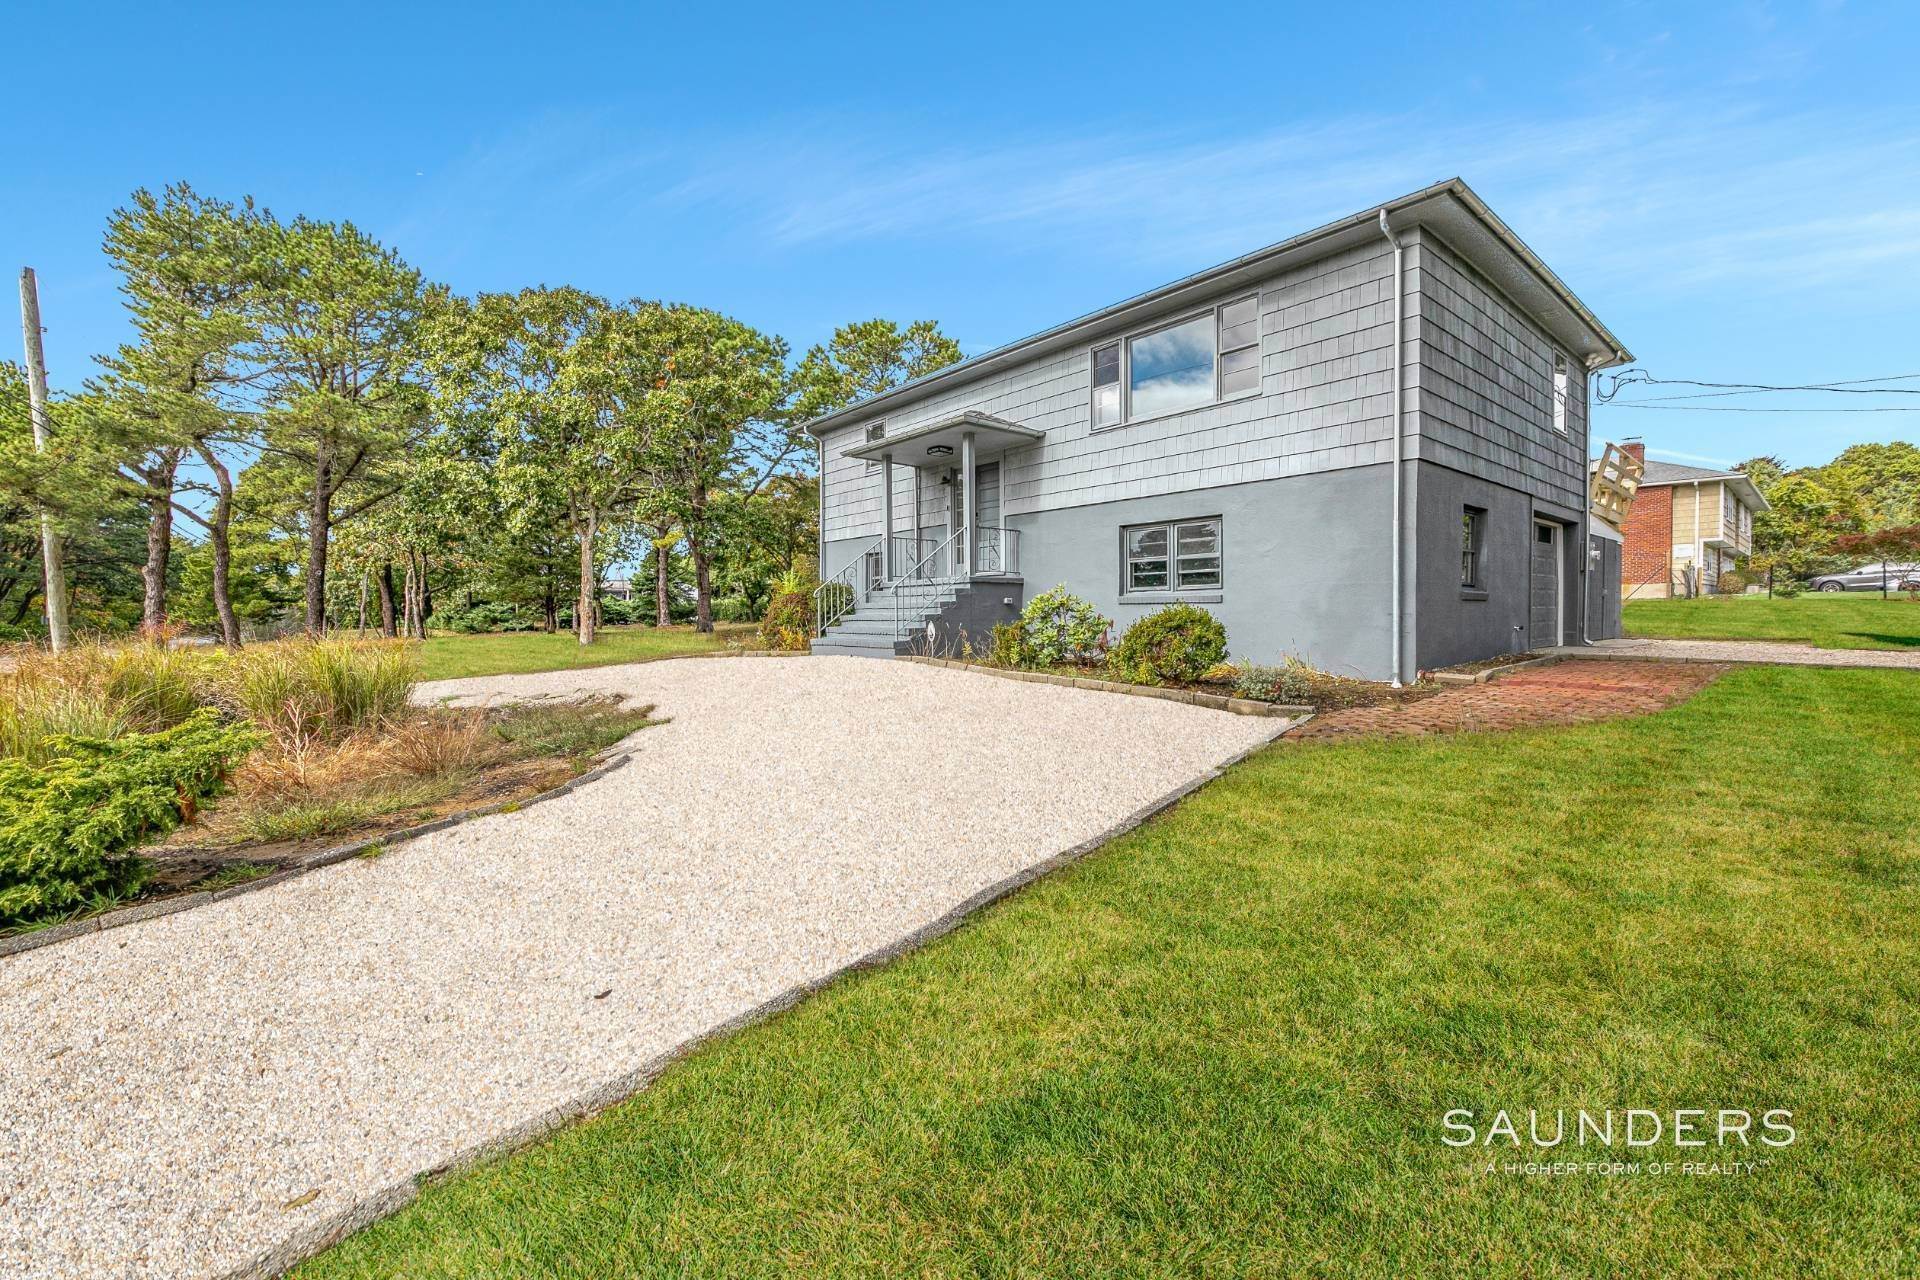 3. Single Family Homes for Sale at South Of Highway Bayside Community 91 Middle Pond Road, Southampton, NY 11968